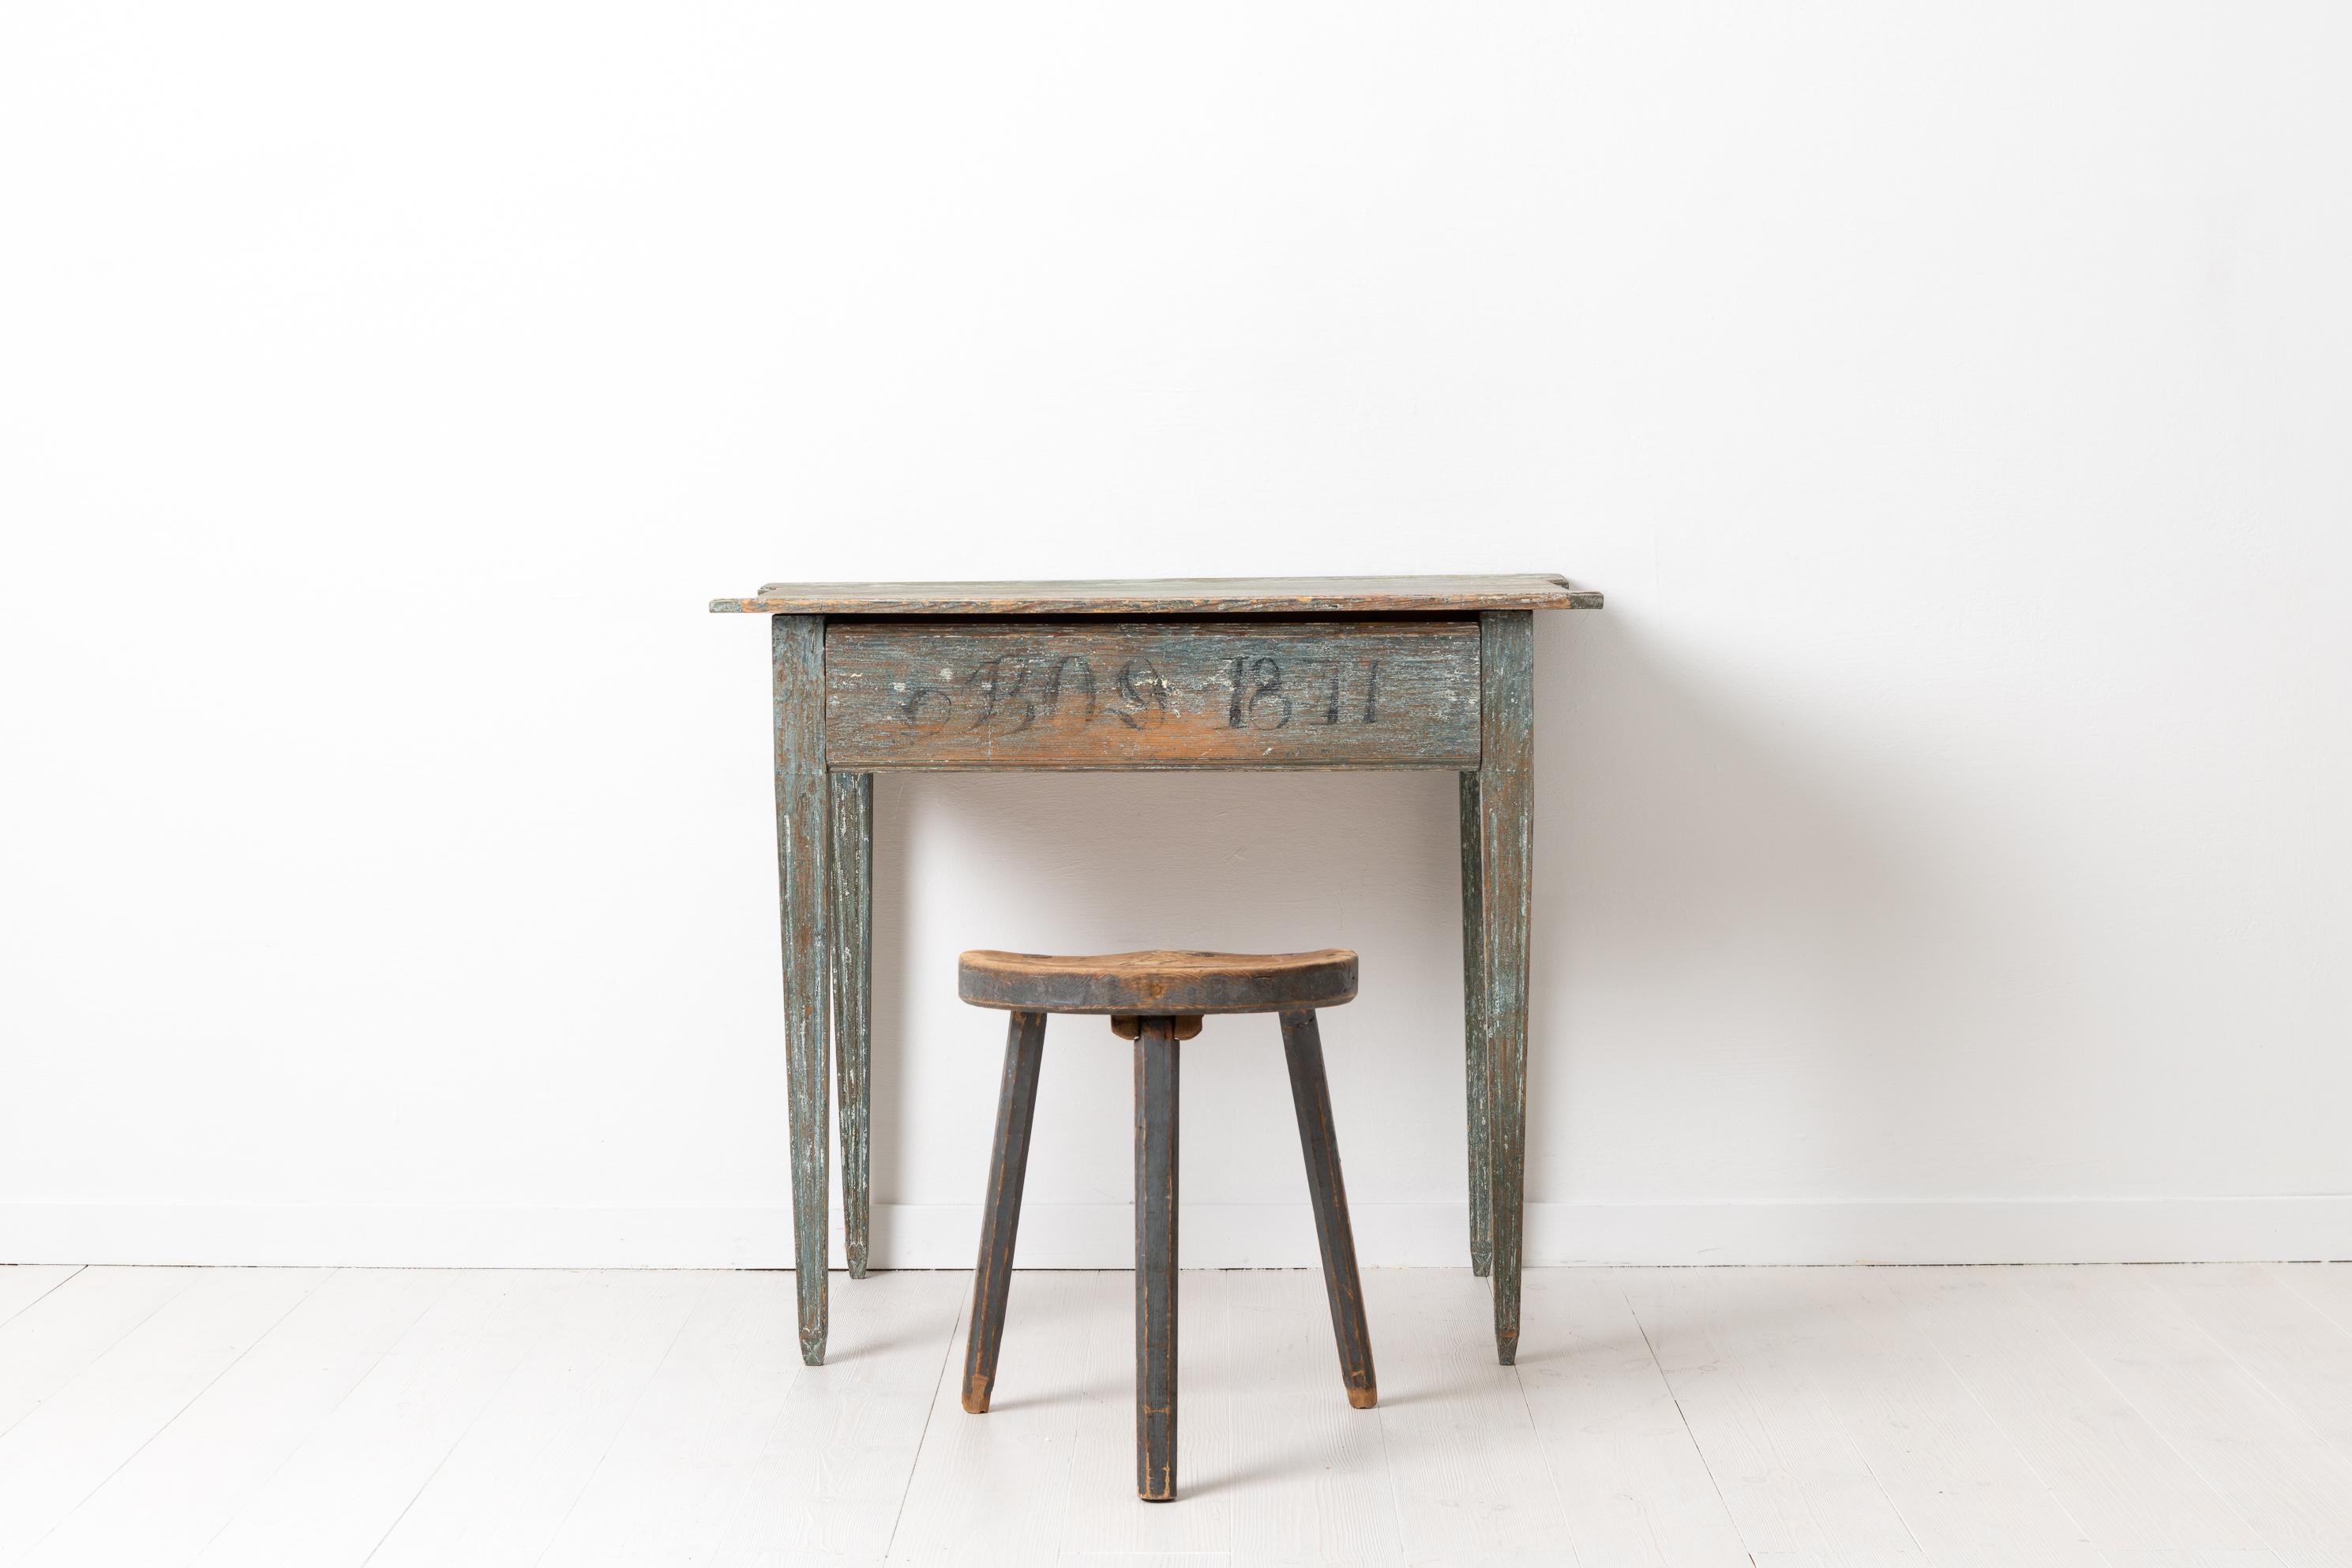 Gustavian wall table in painted pine with the original distressed paint. The table has straight tapered legs with vertical flutes. An unusual detail is the ending of the legs which are decorated with stylised crosses. Even the protruding corners of